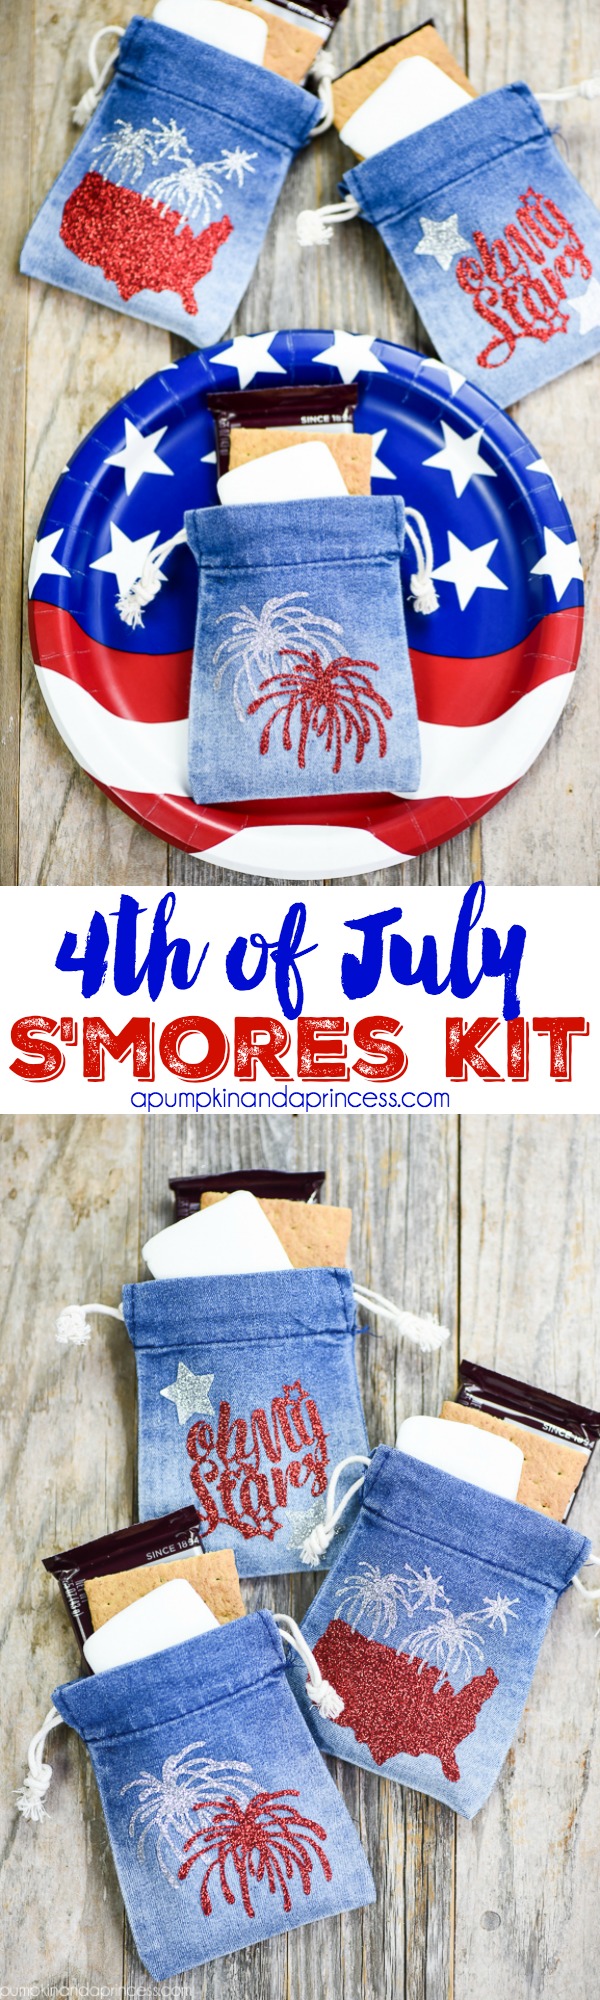 4th of July S'mores Kit - Create mini 4th of July s’mores kits for your patriotic party with denim treat bags and glitter heat transfer vinyl